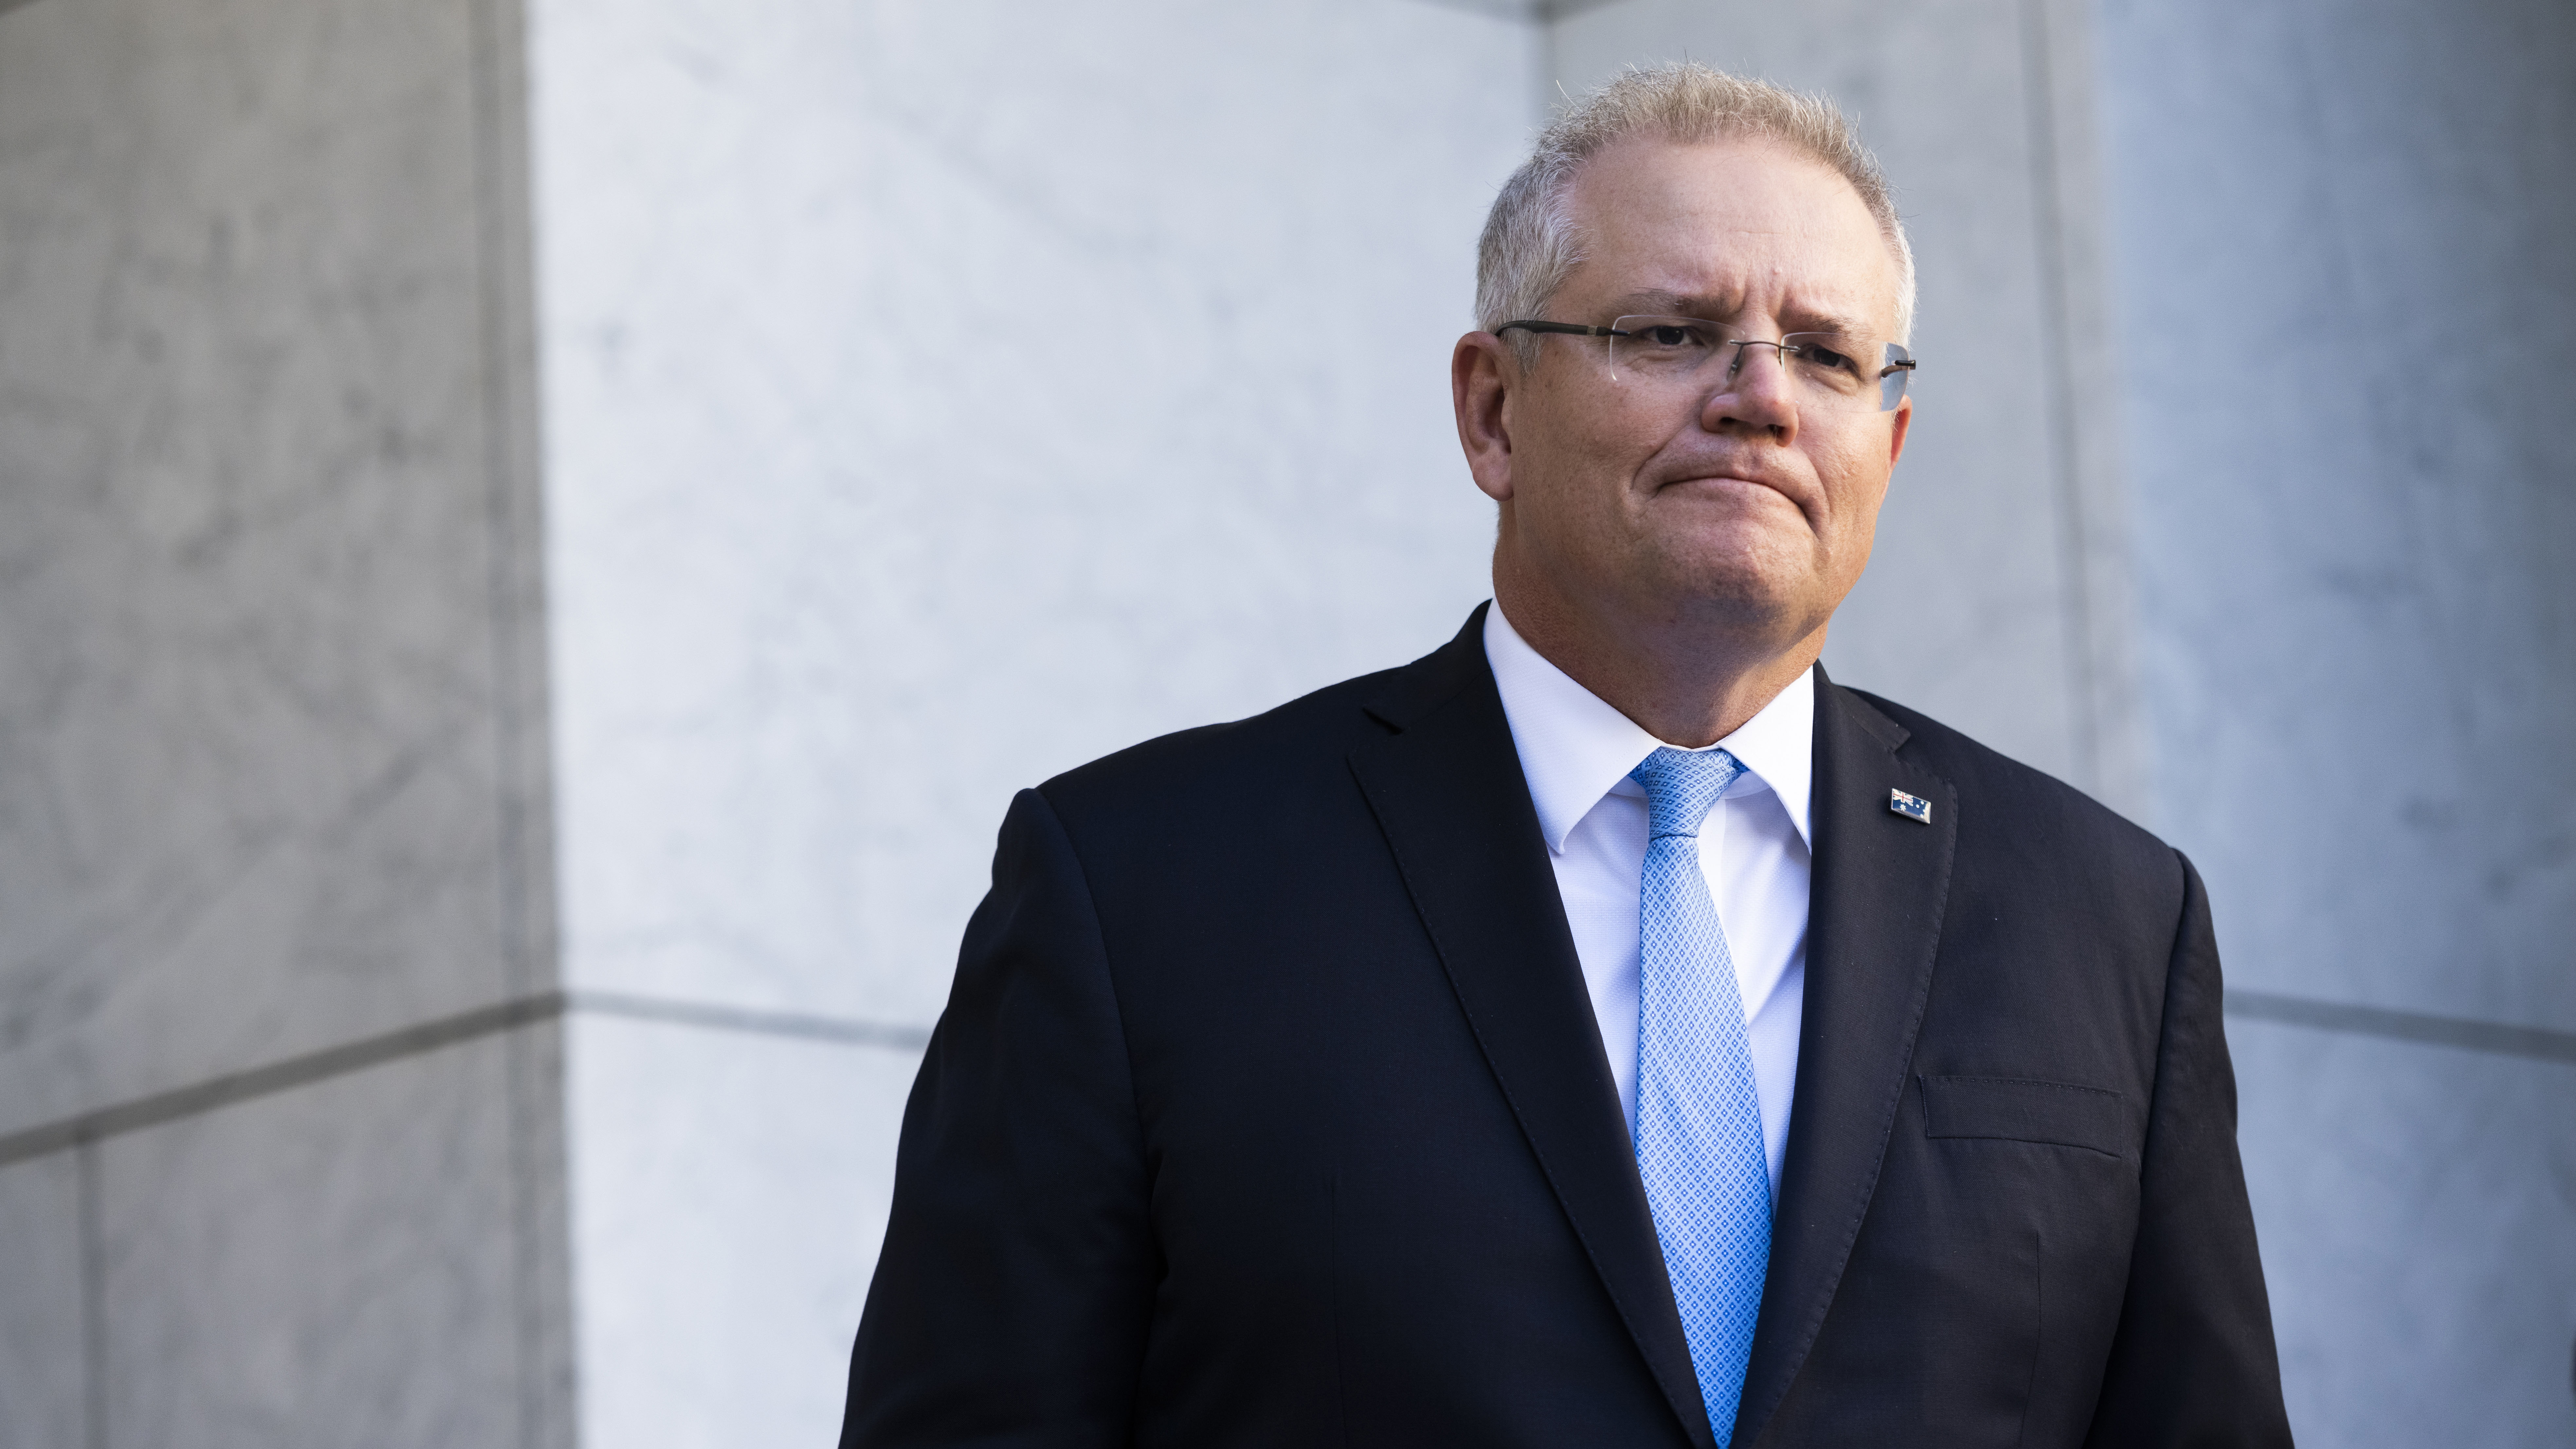 Australian Prime Minister Scott Morrison spoke at a press conference in Canberra, Australia, on May 15th.